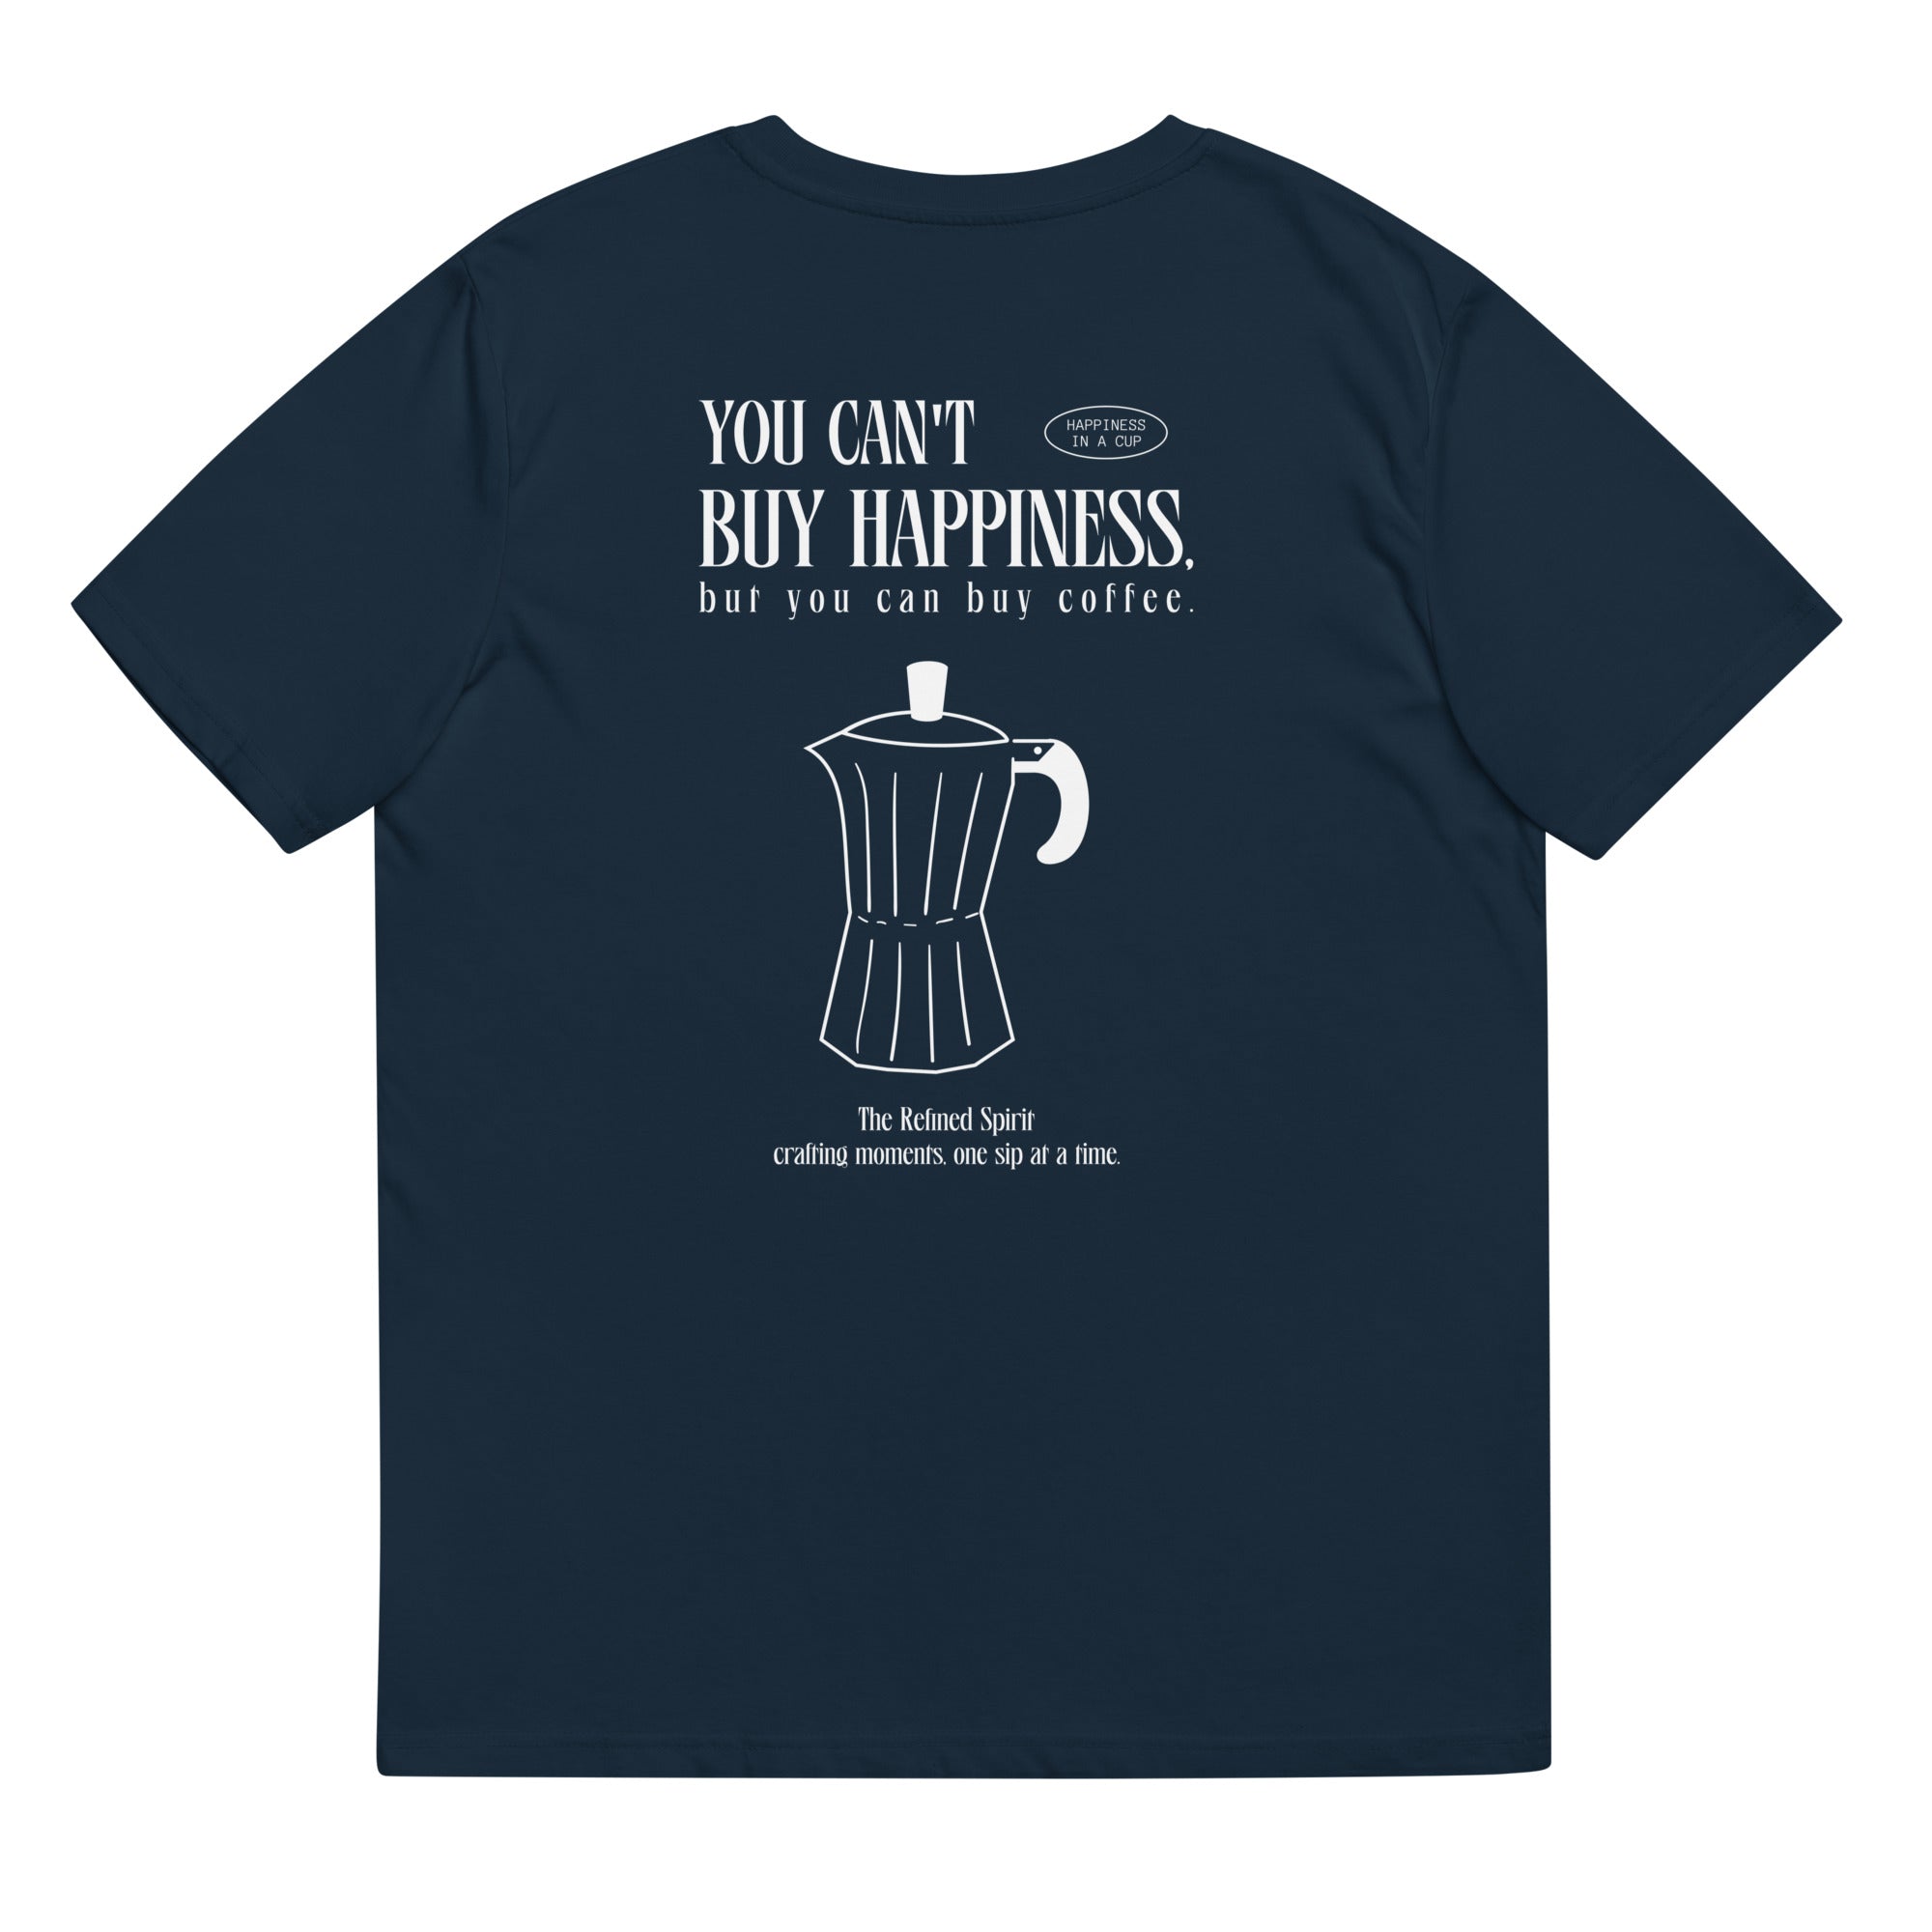 You can't buy happiness but you can buy coffe - Organic T-shirt - The Refined Spirit